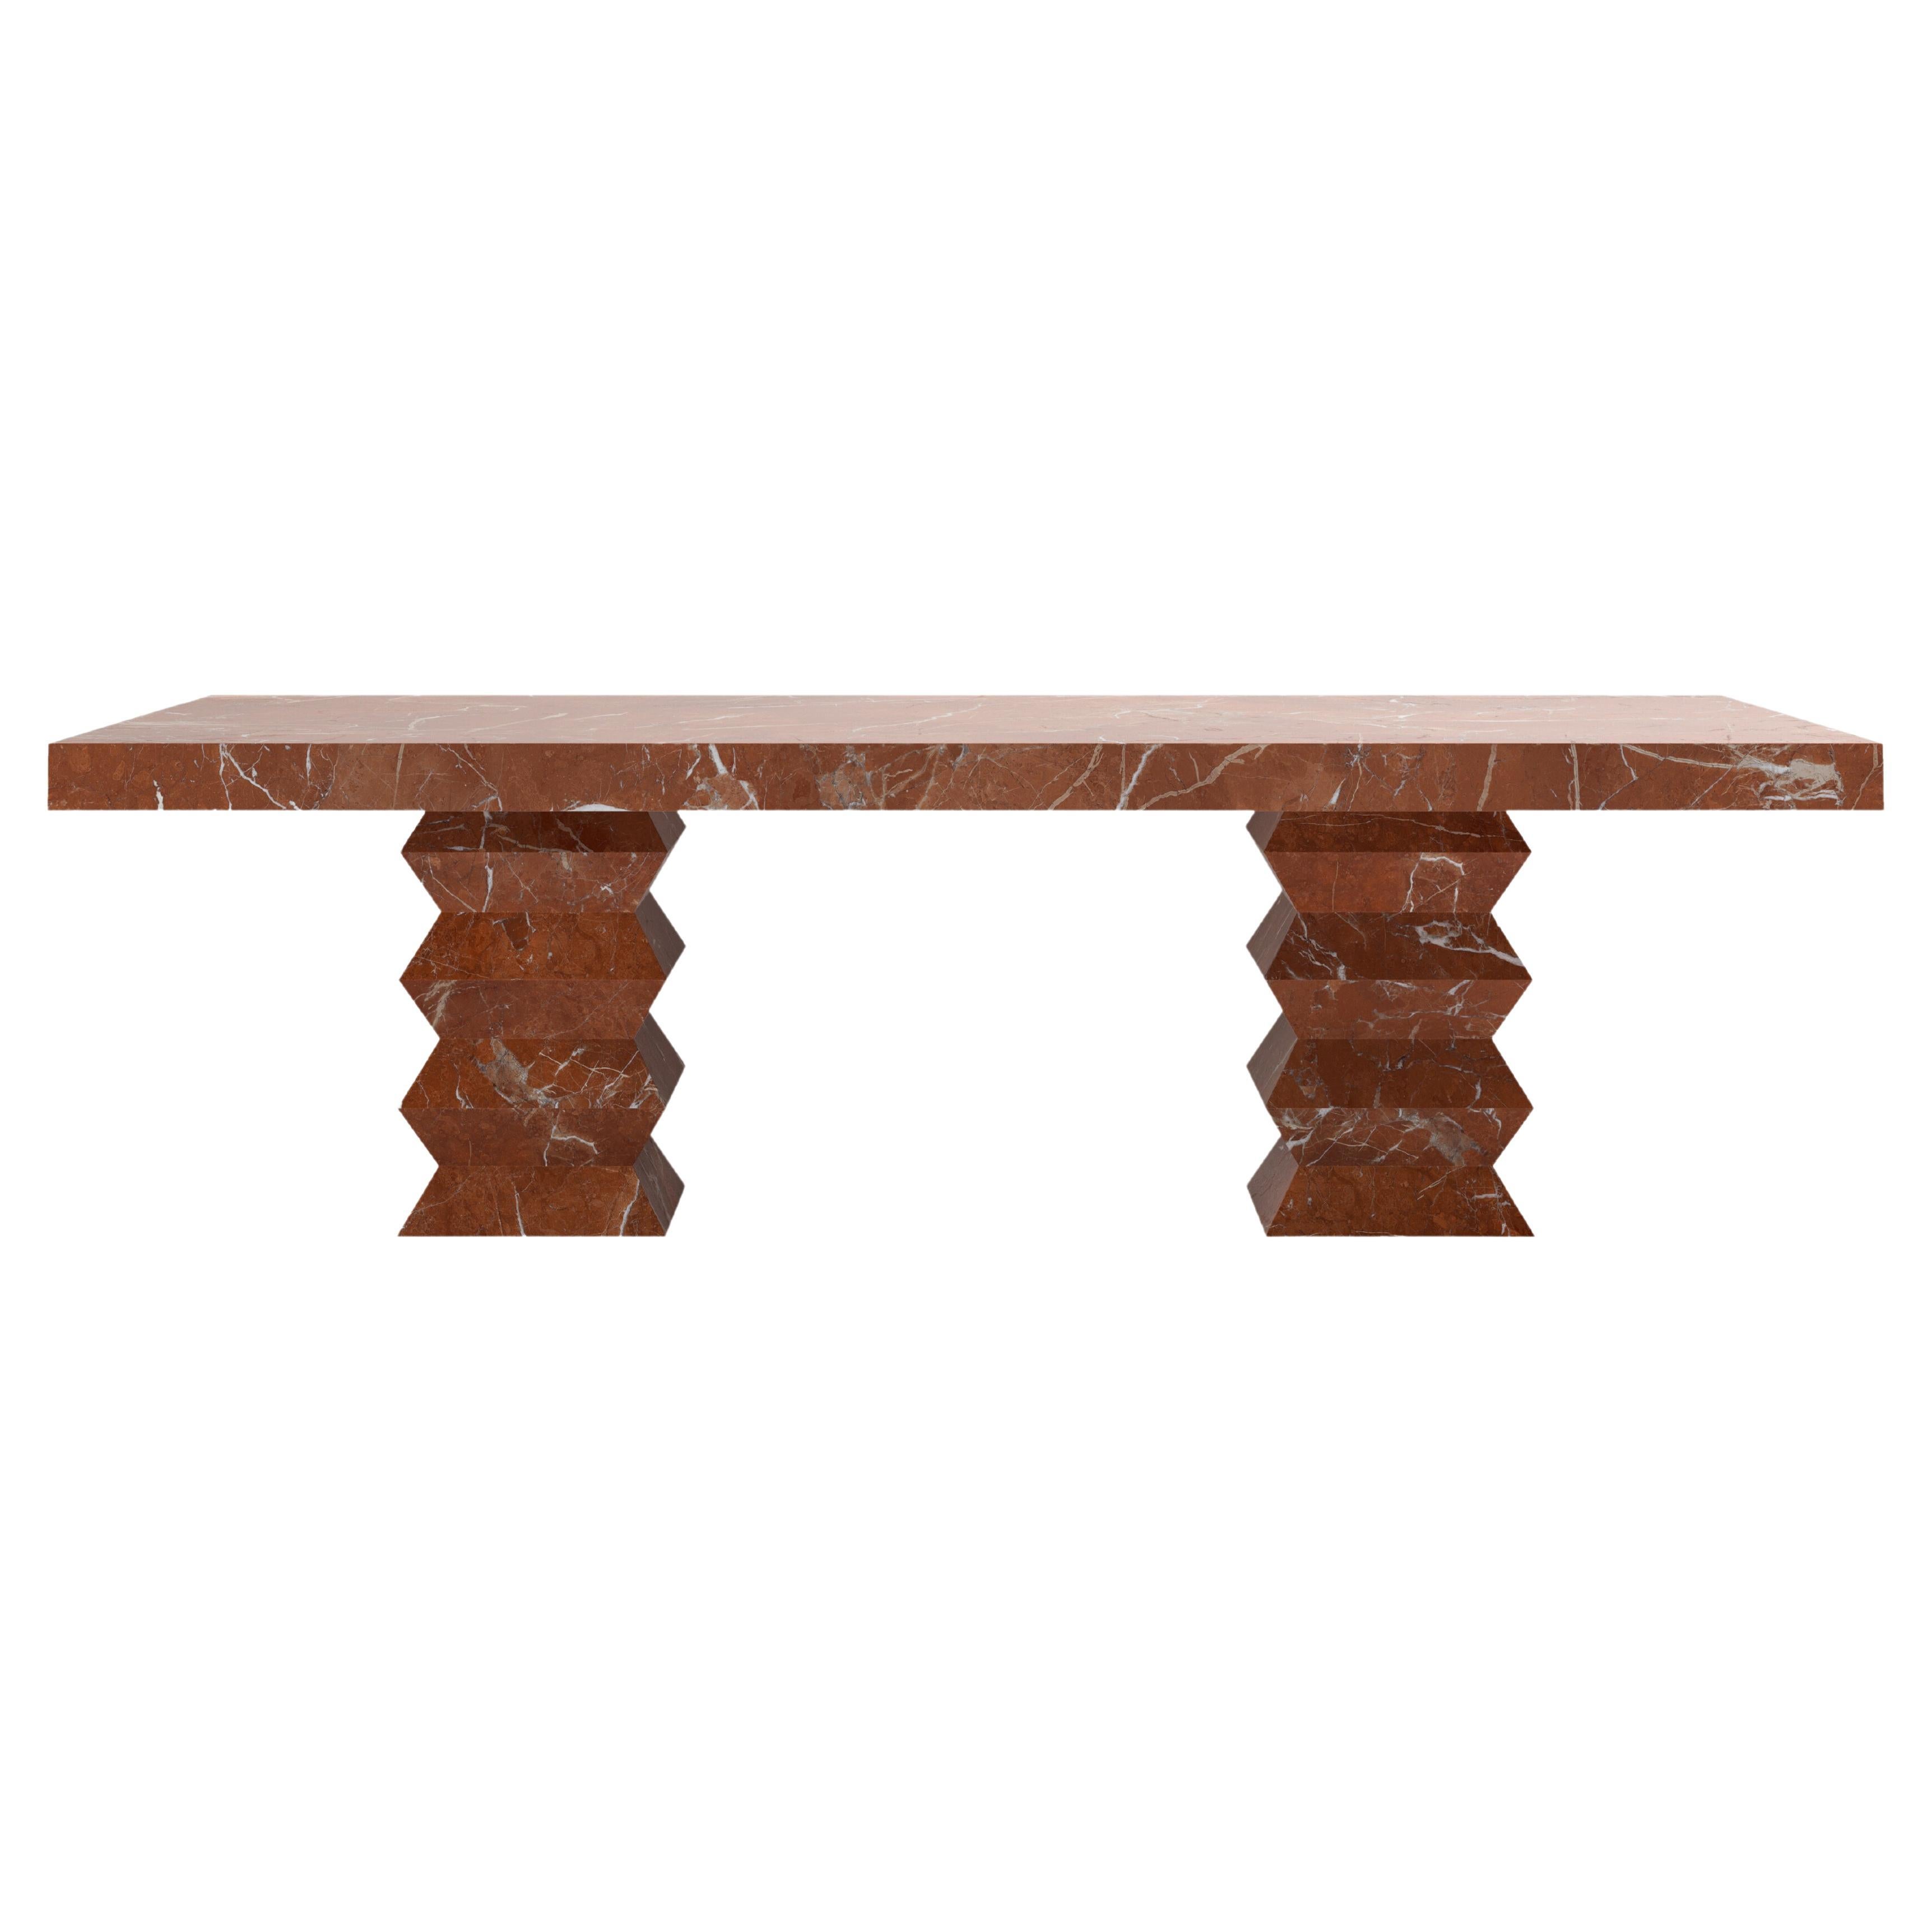 FORM(LA) Grinza Rectangle Dining Table 118"L x 48"W x 32"H Rojo Alicante Marble For Sale